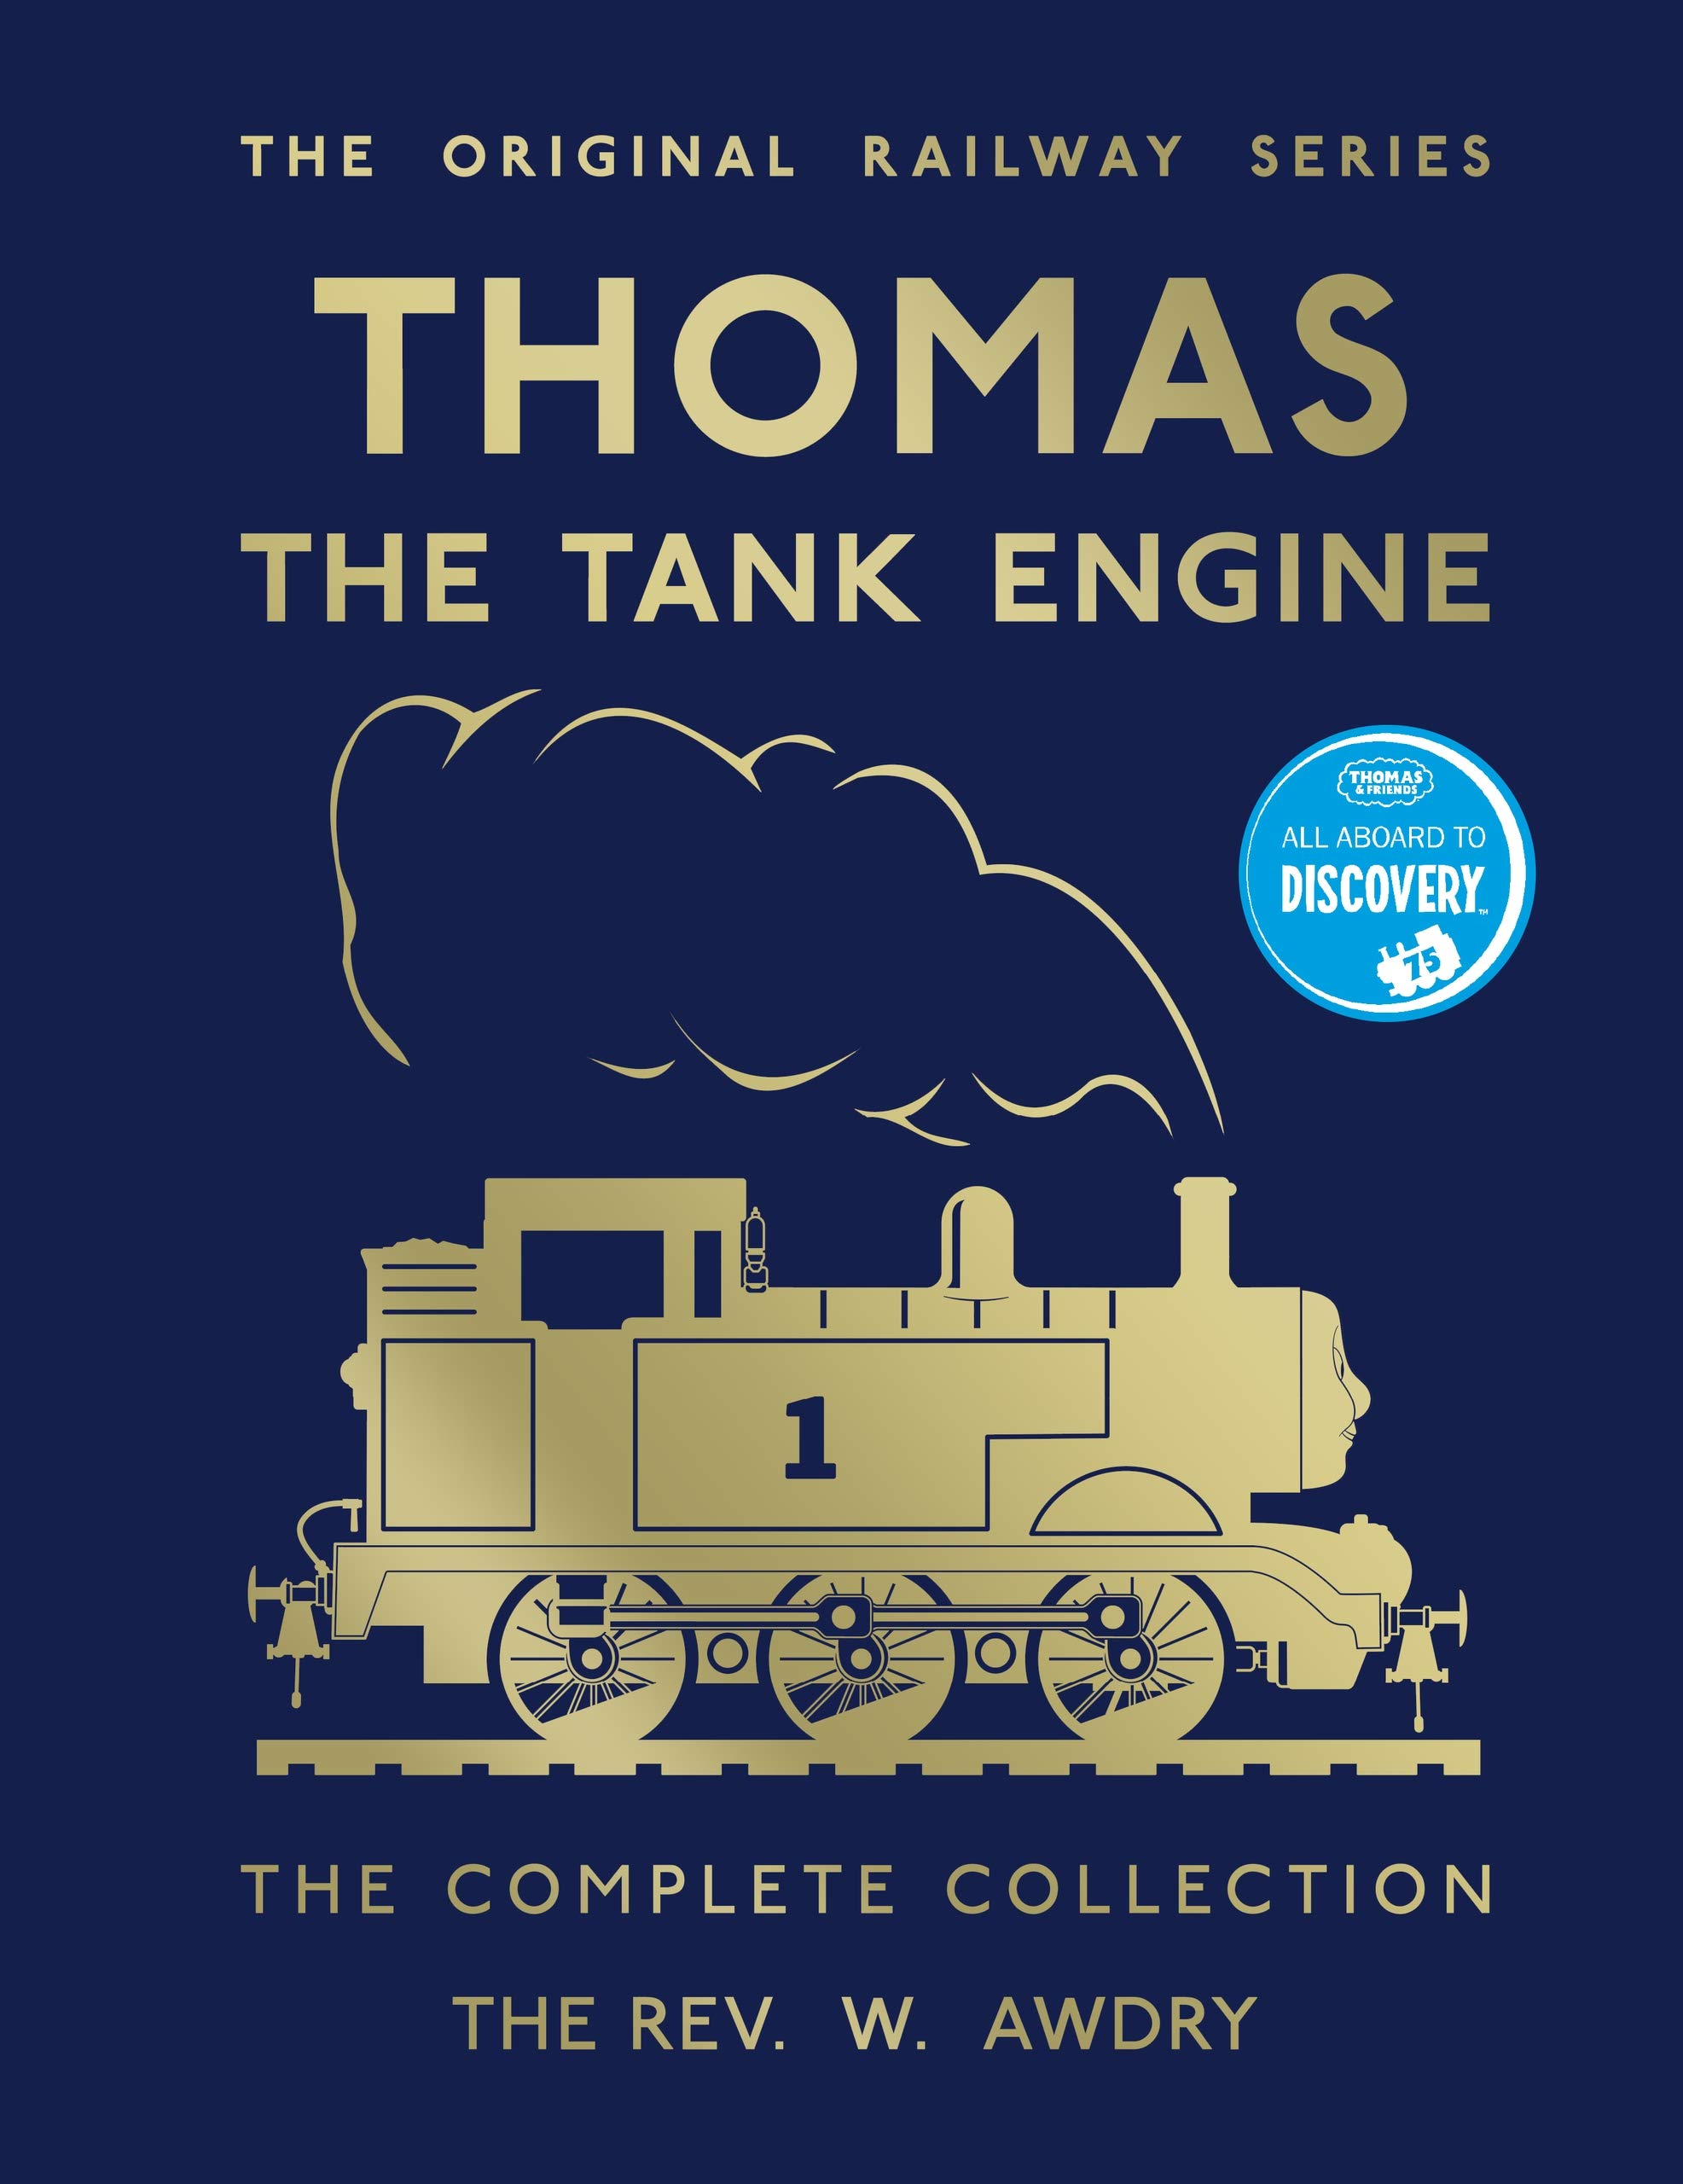 THOMAS THE TANK ENGINE TheNew Collection